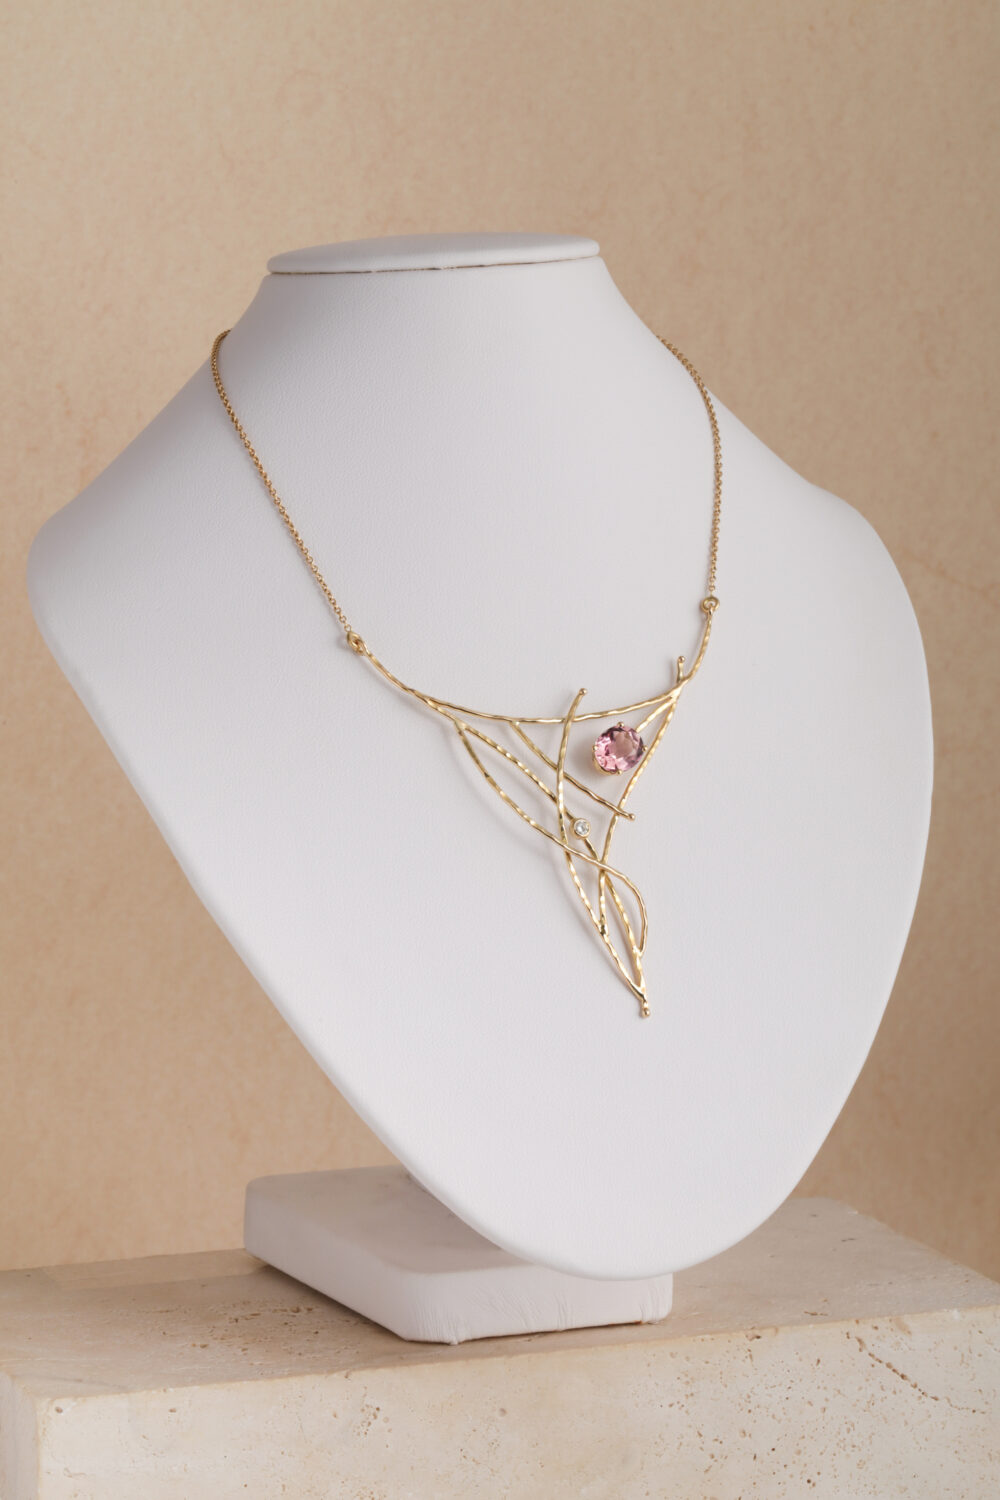 Necklace crafted from 18-karat gold set with a brilliant cut diamond and a kunzite gemstone.